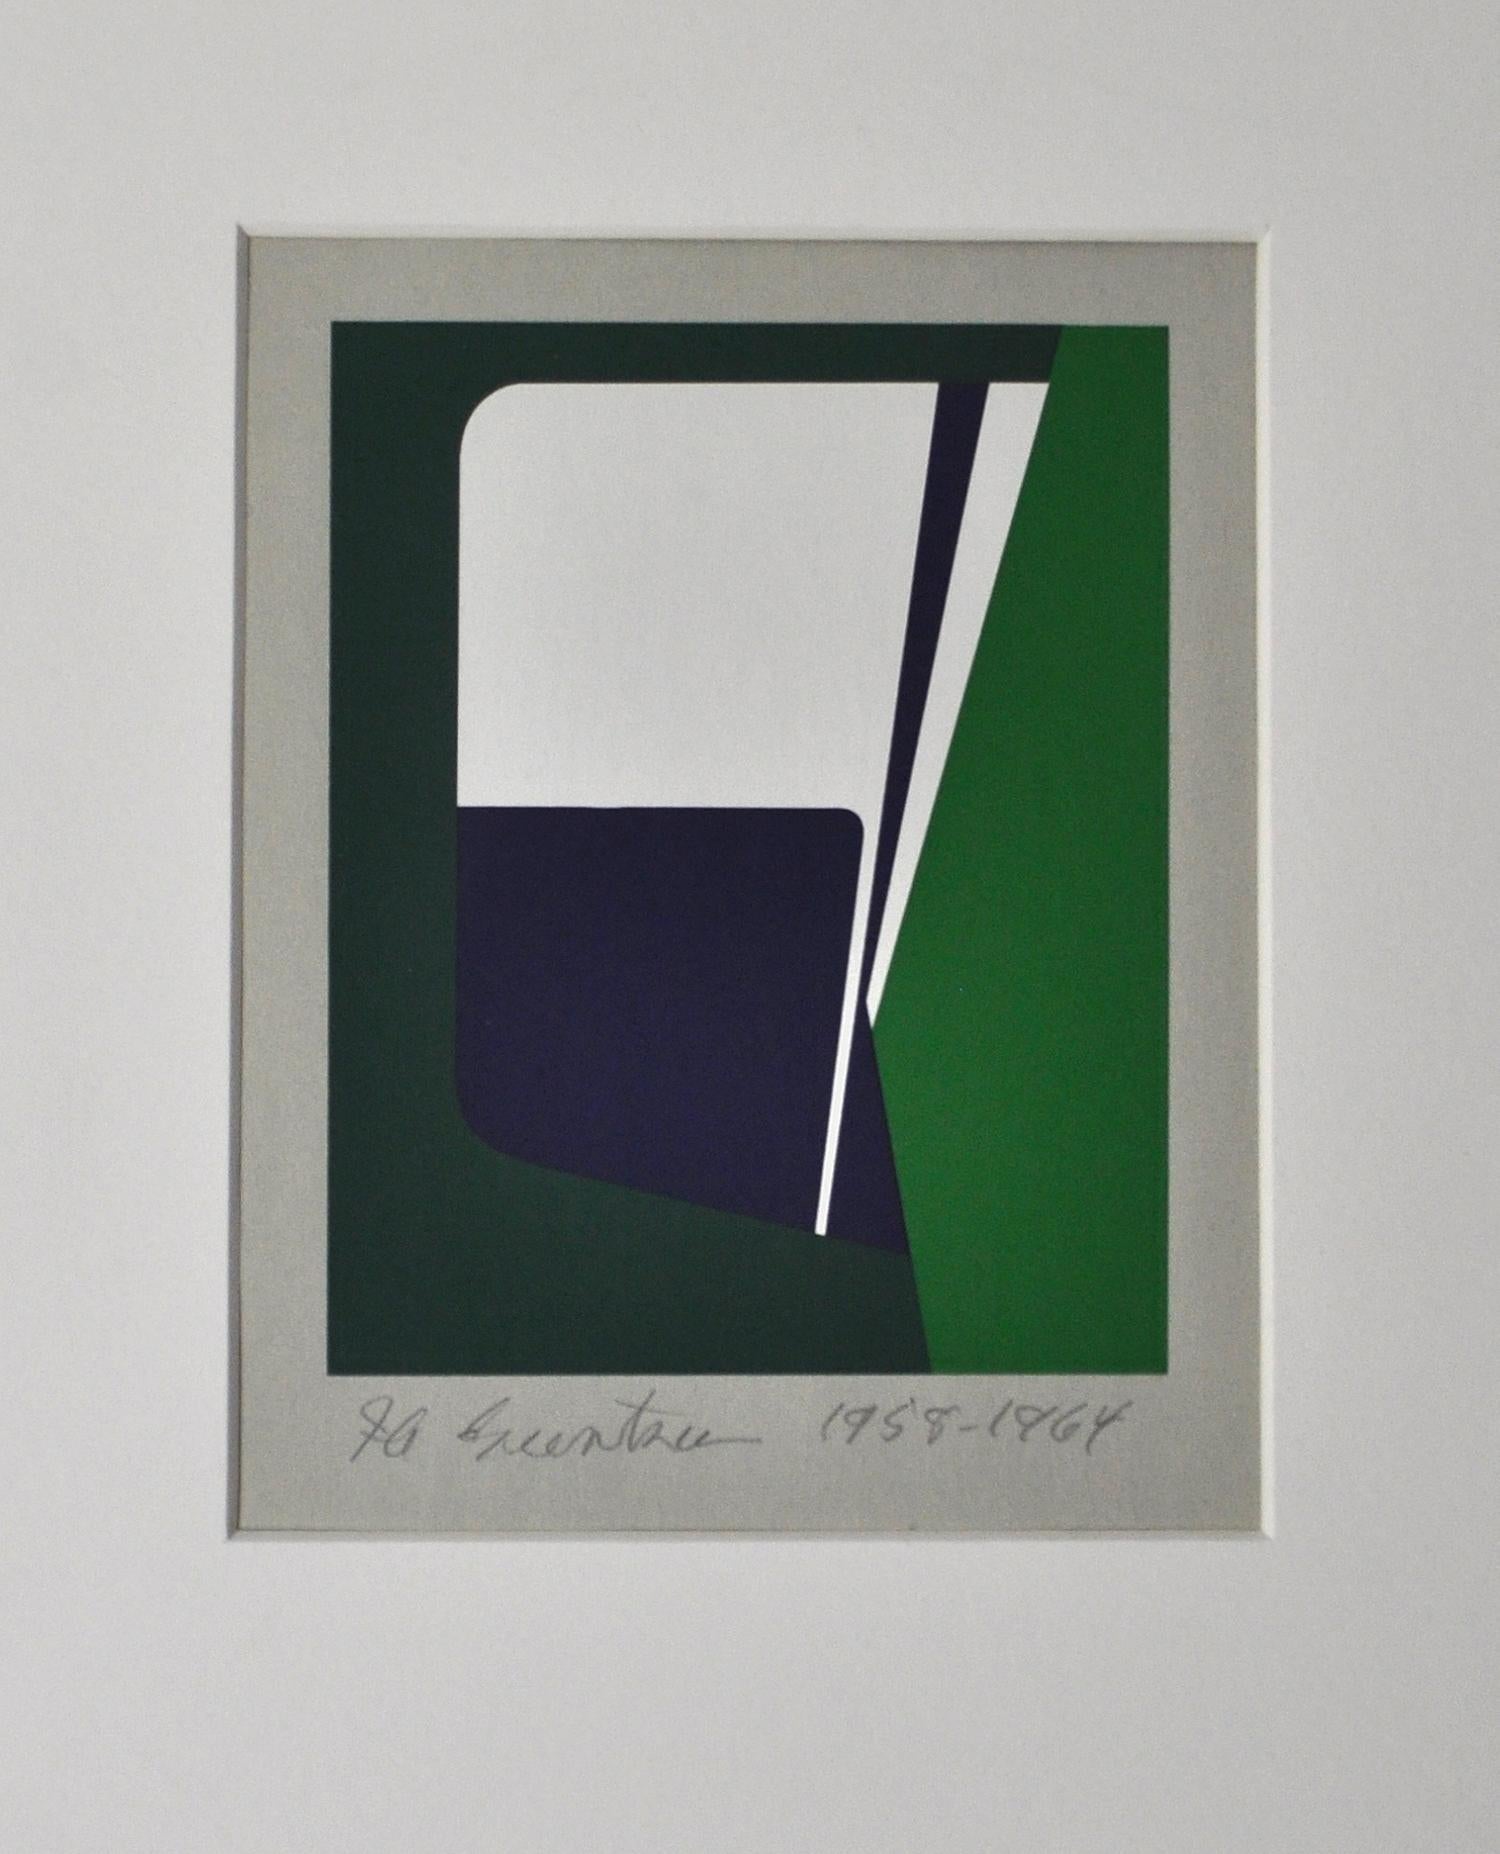 Screen print by Ib Geertsen, signed, 1958-1964.
Art size: 11.2 x 15.5 cm
Ib Geertsen (1919-2009) worked with the concrete art, where the line, shape, color and movement are the content.
He was a sculptor, painter, graphic artist and color